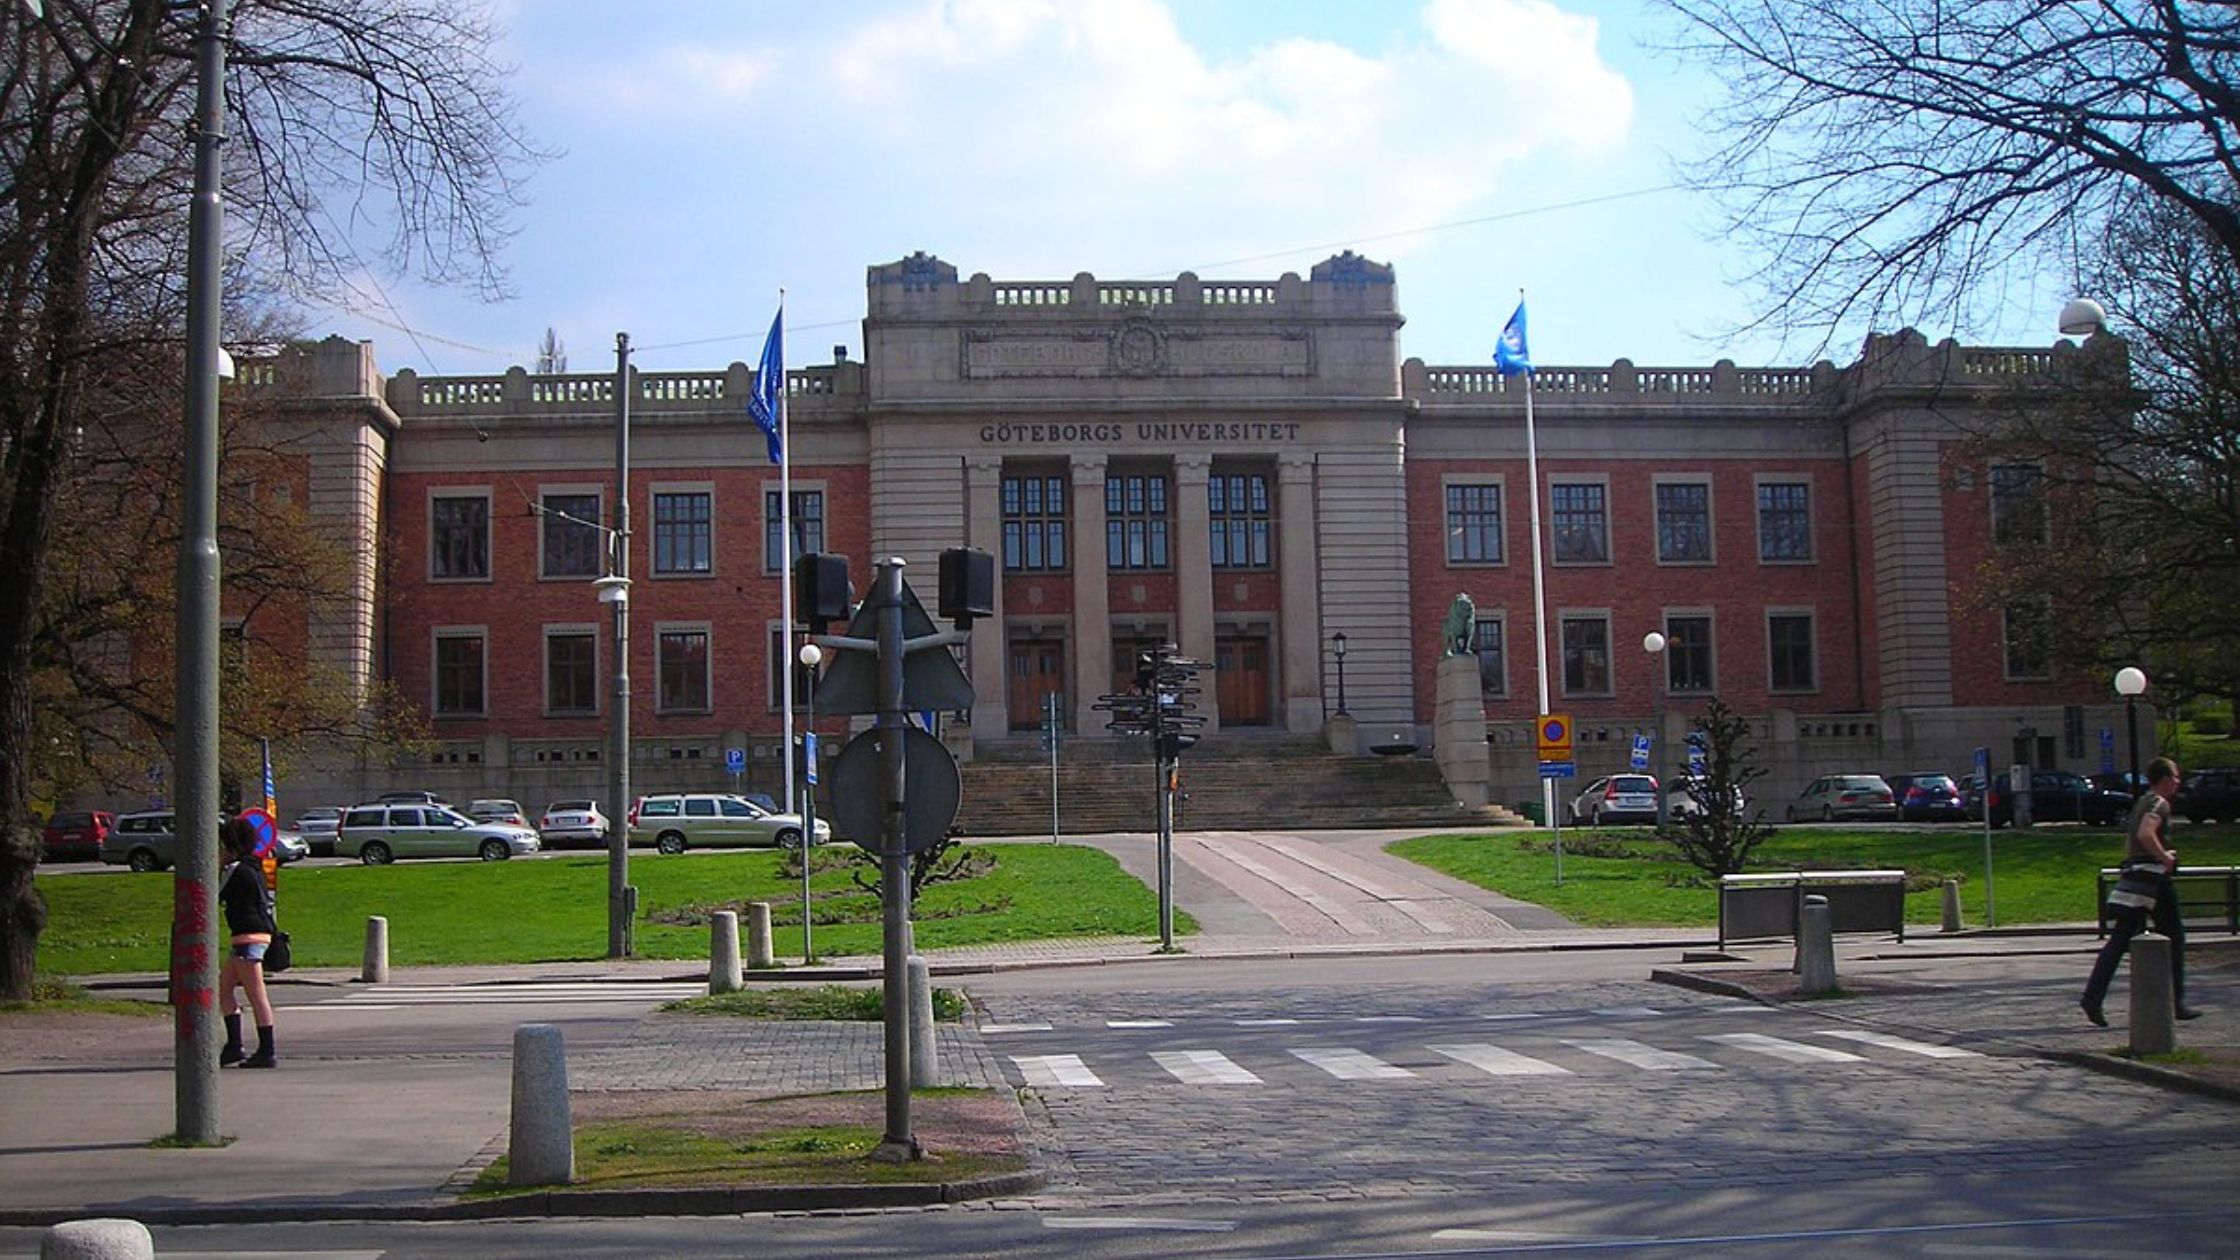 Outside view of University of Gothenburg.